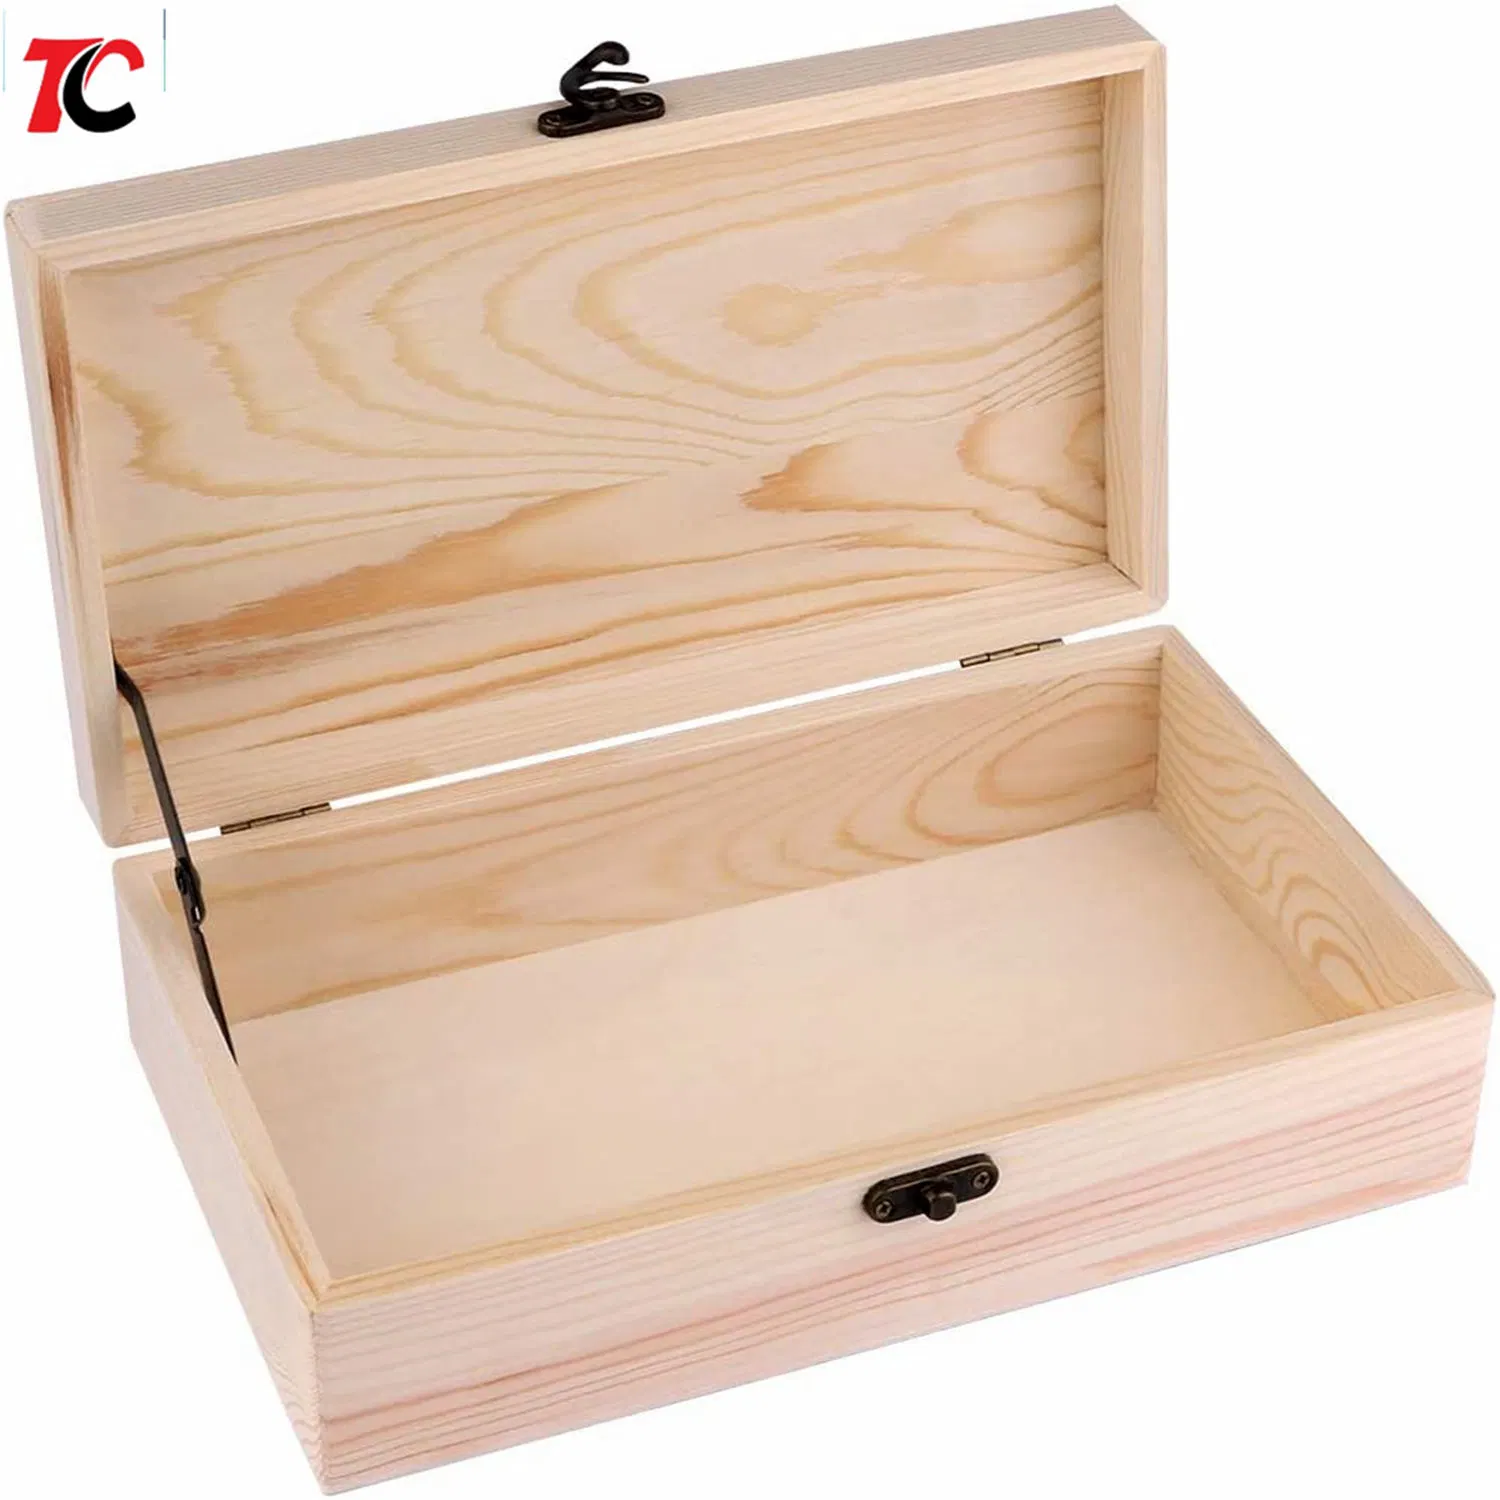 Unfinished Wooden Box with Rectangle Keepsake Box Clasp Wood Box, Storage Box Wooden Gift Boxes for DIY Crafts